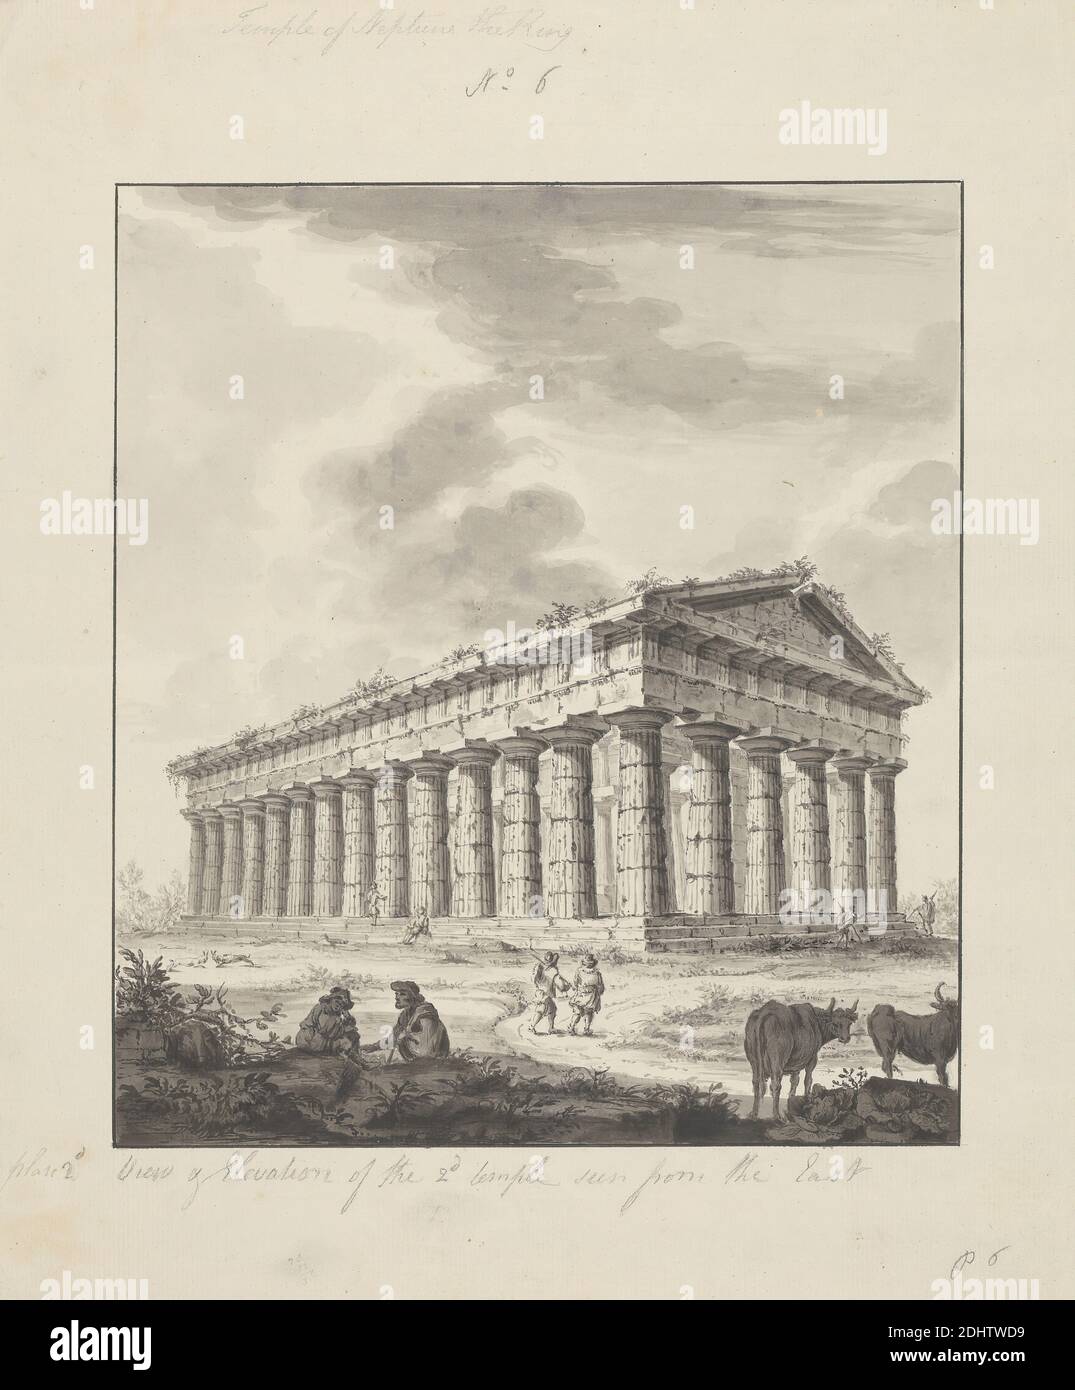 No. 6 Temple of Neptune the King, View and Elevation of the 2nd temple - seen from the east, James Bruce, 1730–1794, British, undated, Pen and black ink with gray wash over graphite on medium, slightly textured, cream laid paper, Sheet: 14 15/16 x 11 5/8 inches (37.9 x 29.5 cm), architectural subject, cattle, Classical, columns (architectural elements), Doric order, figures (representations), pediments, ruins, temples, Paestum Stock Photo